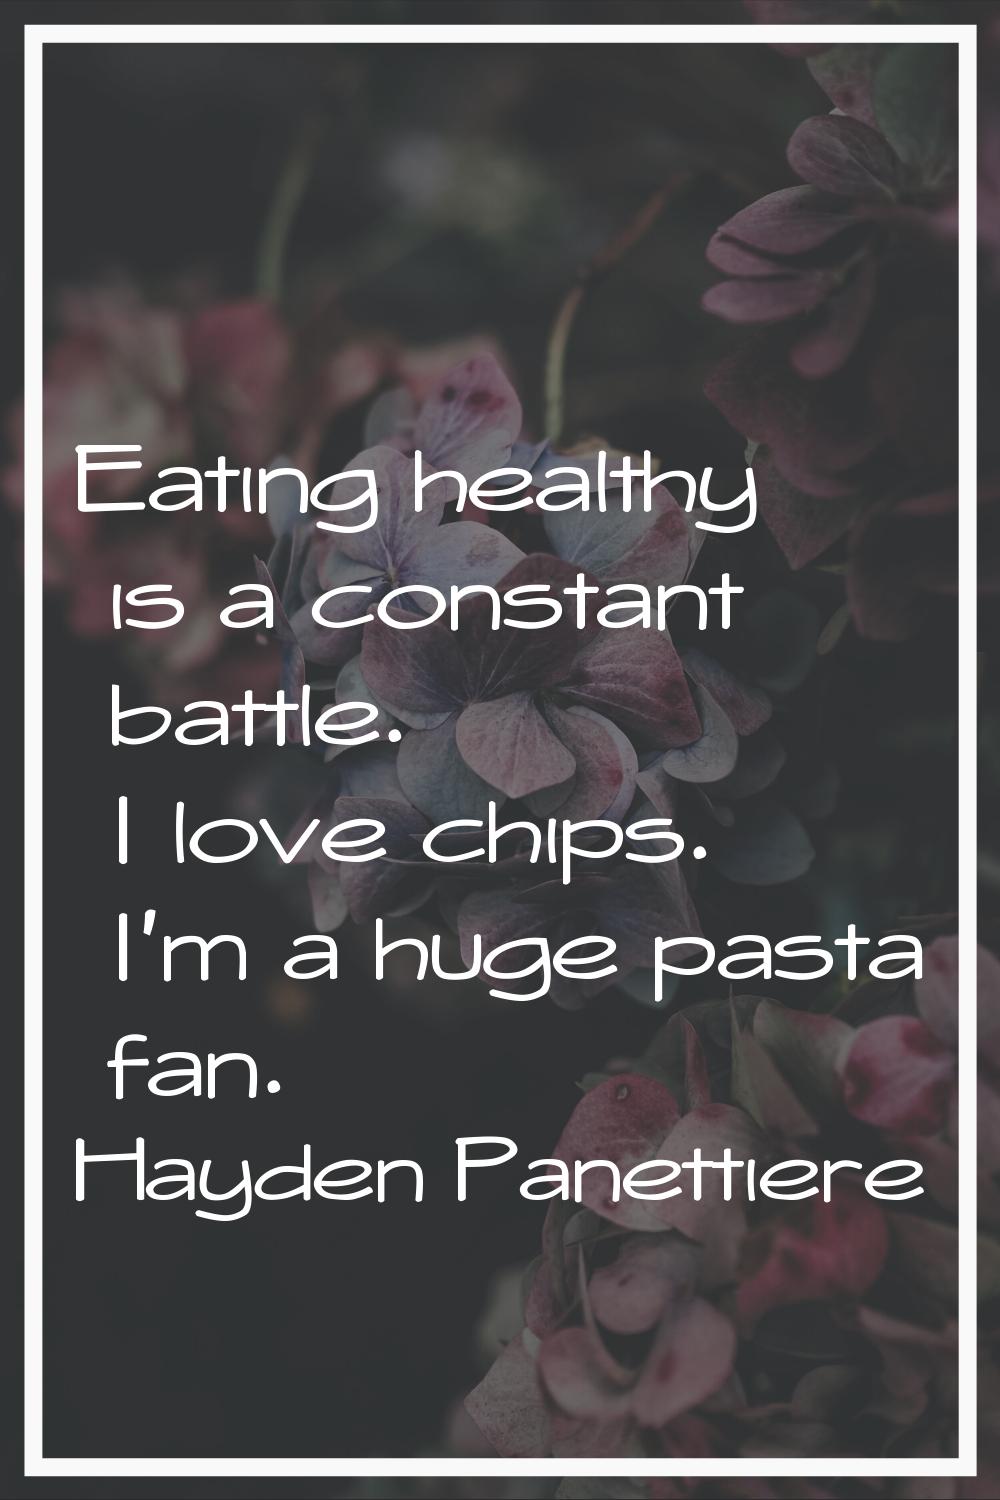 Eating healthy is a constant battle. I love chips. I'm a huge pasta fan.